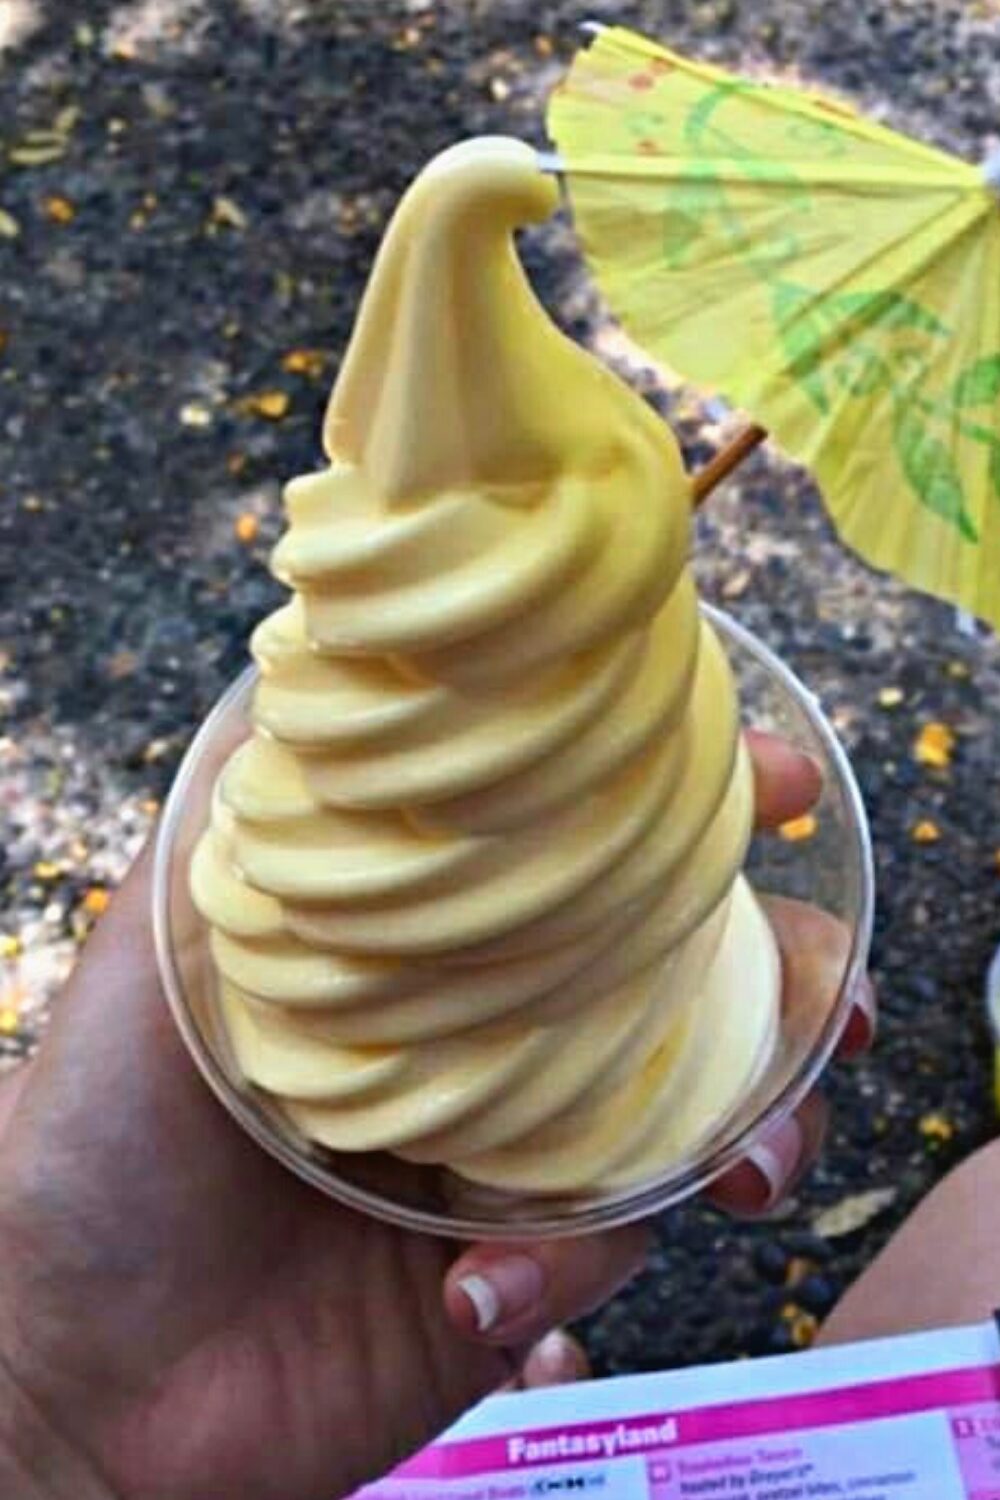 A serving of Disneyland Dole Whip